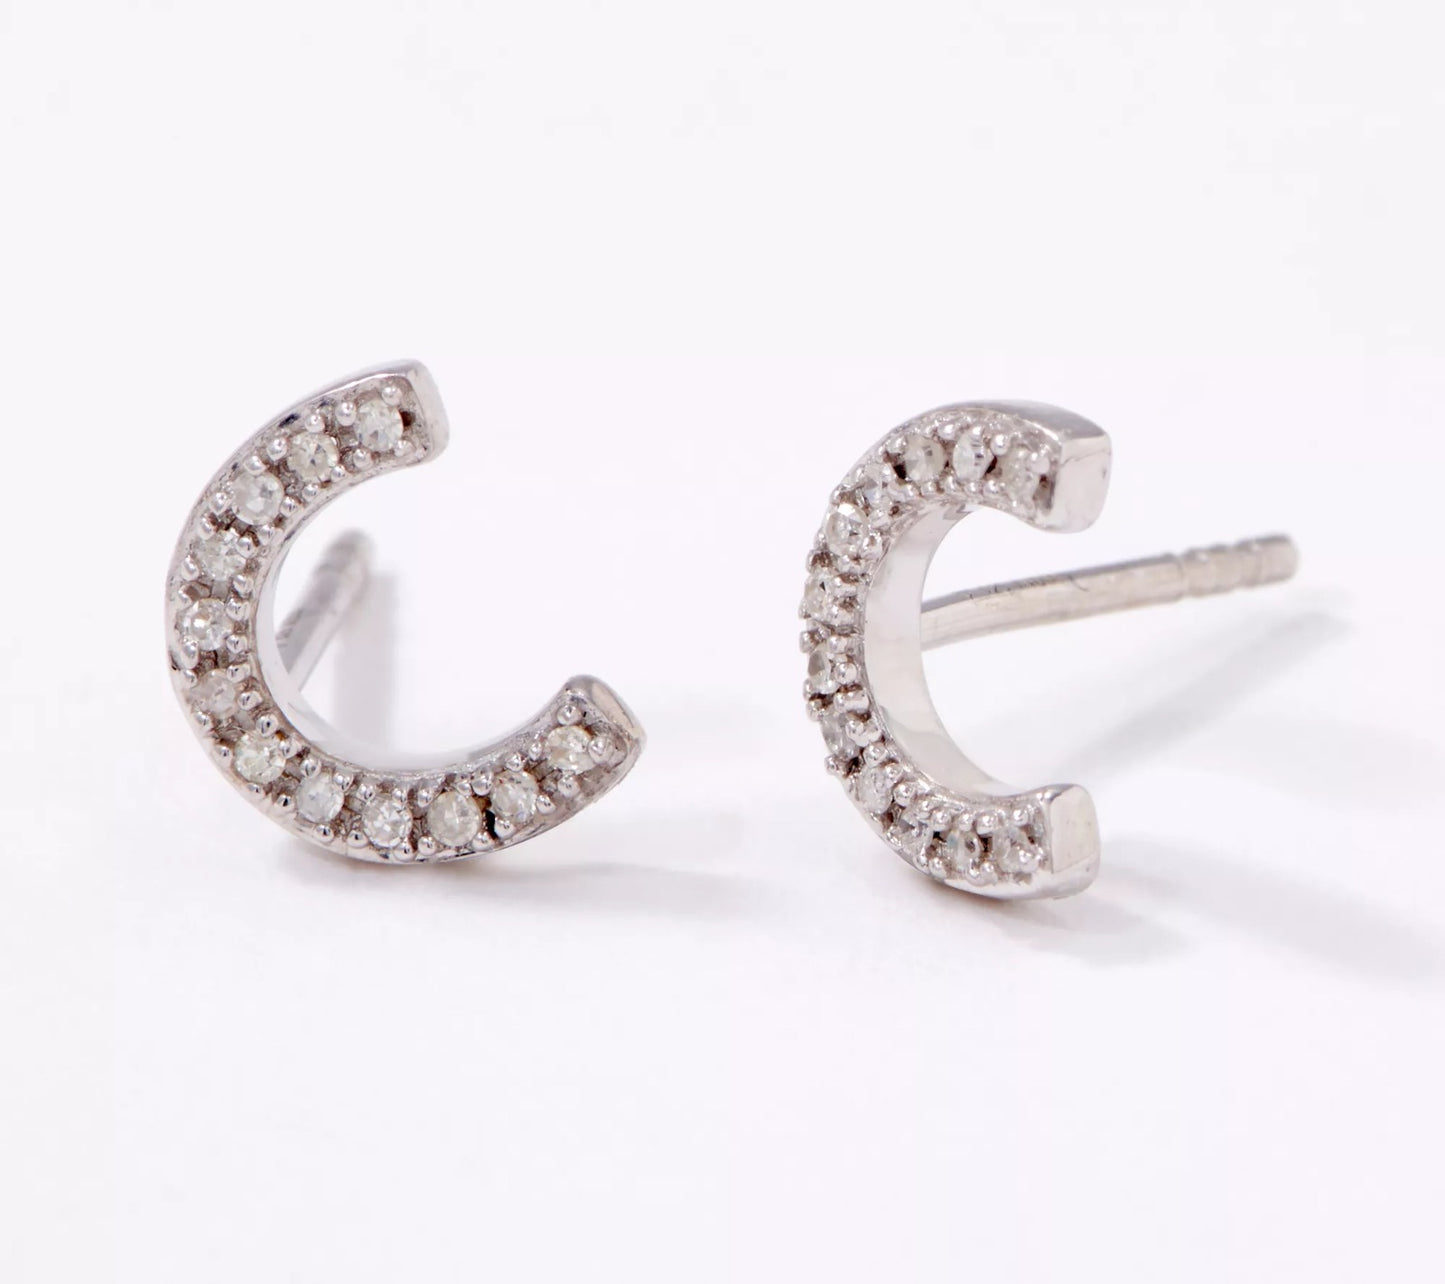 Affinity Round Diamond, C Initial Stud Earrings, Sterling Silver